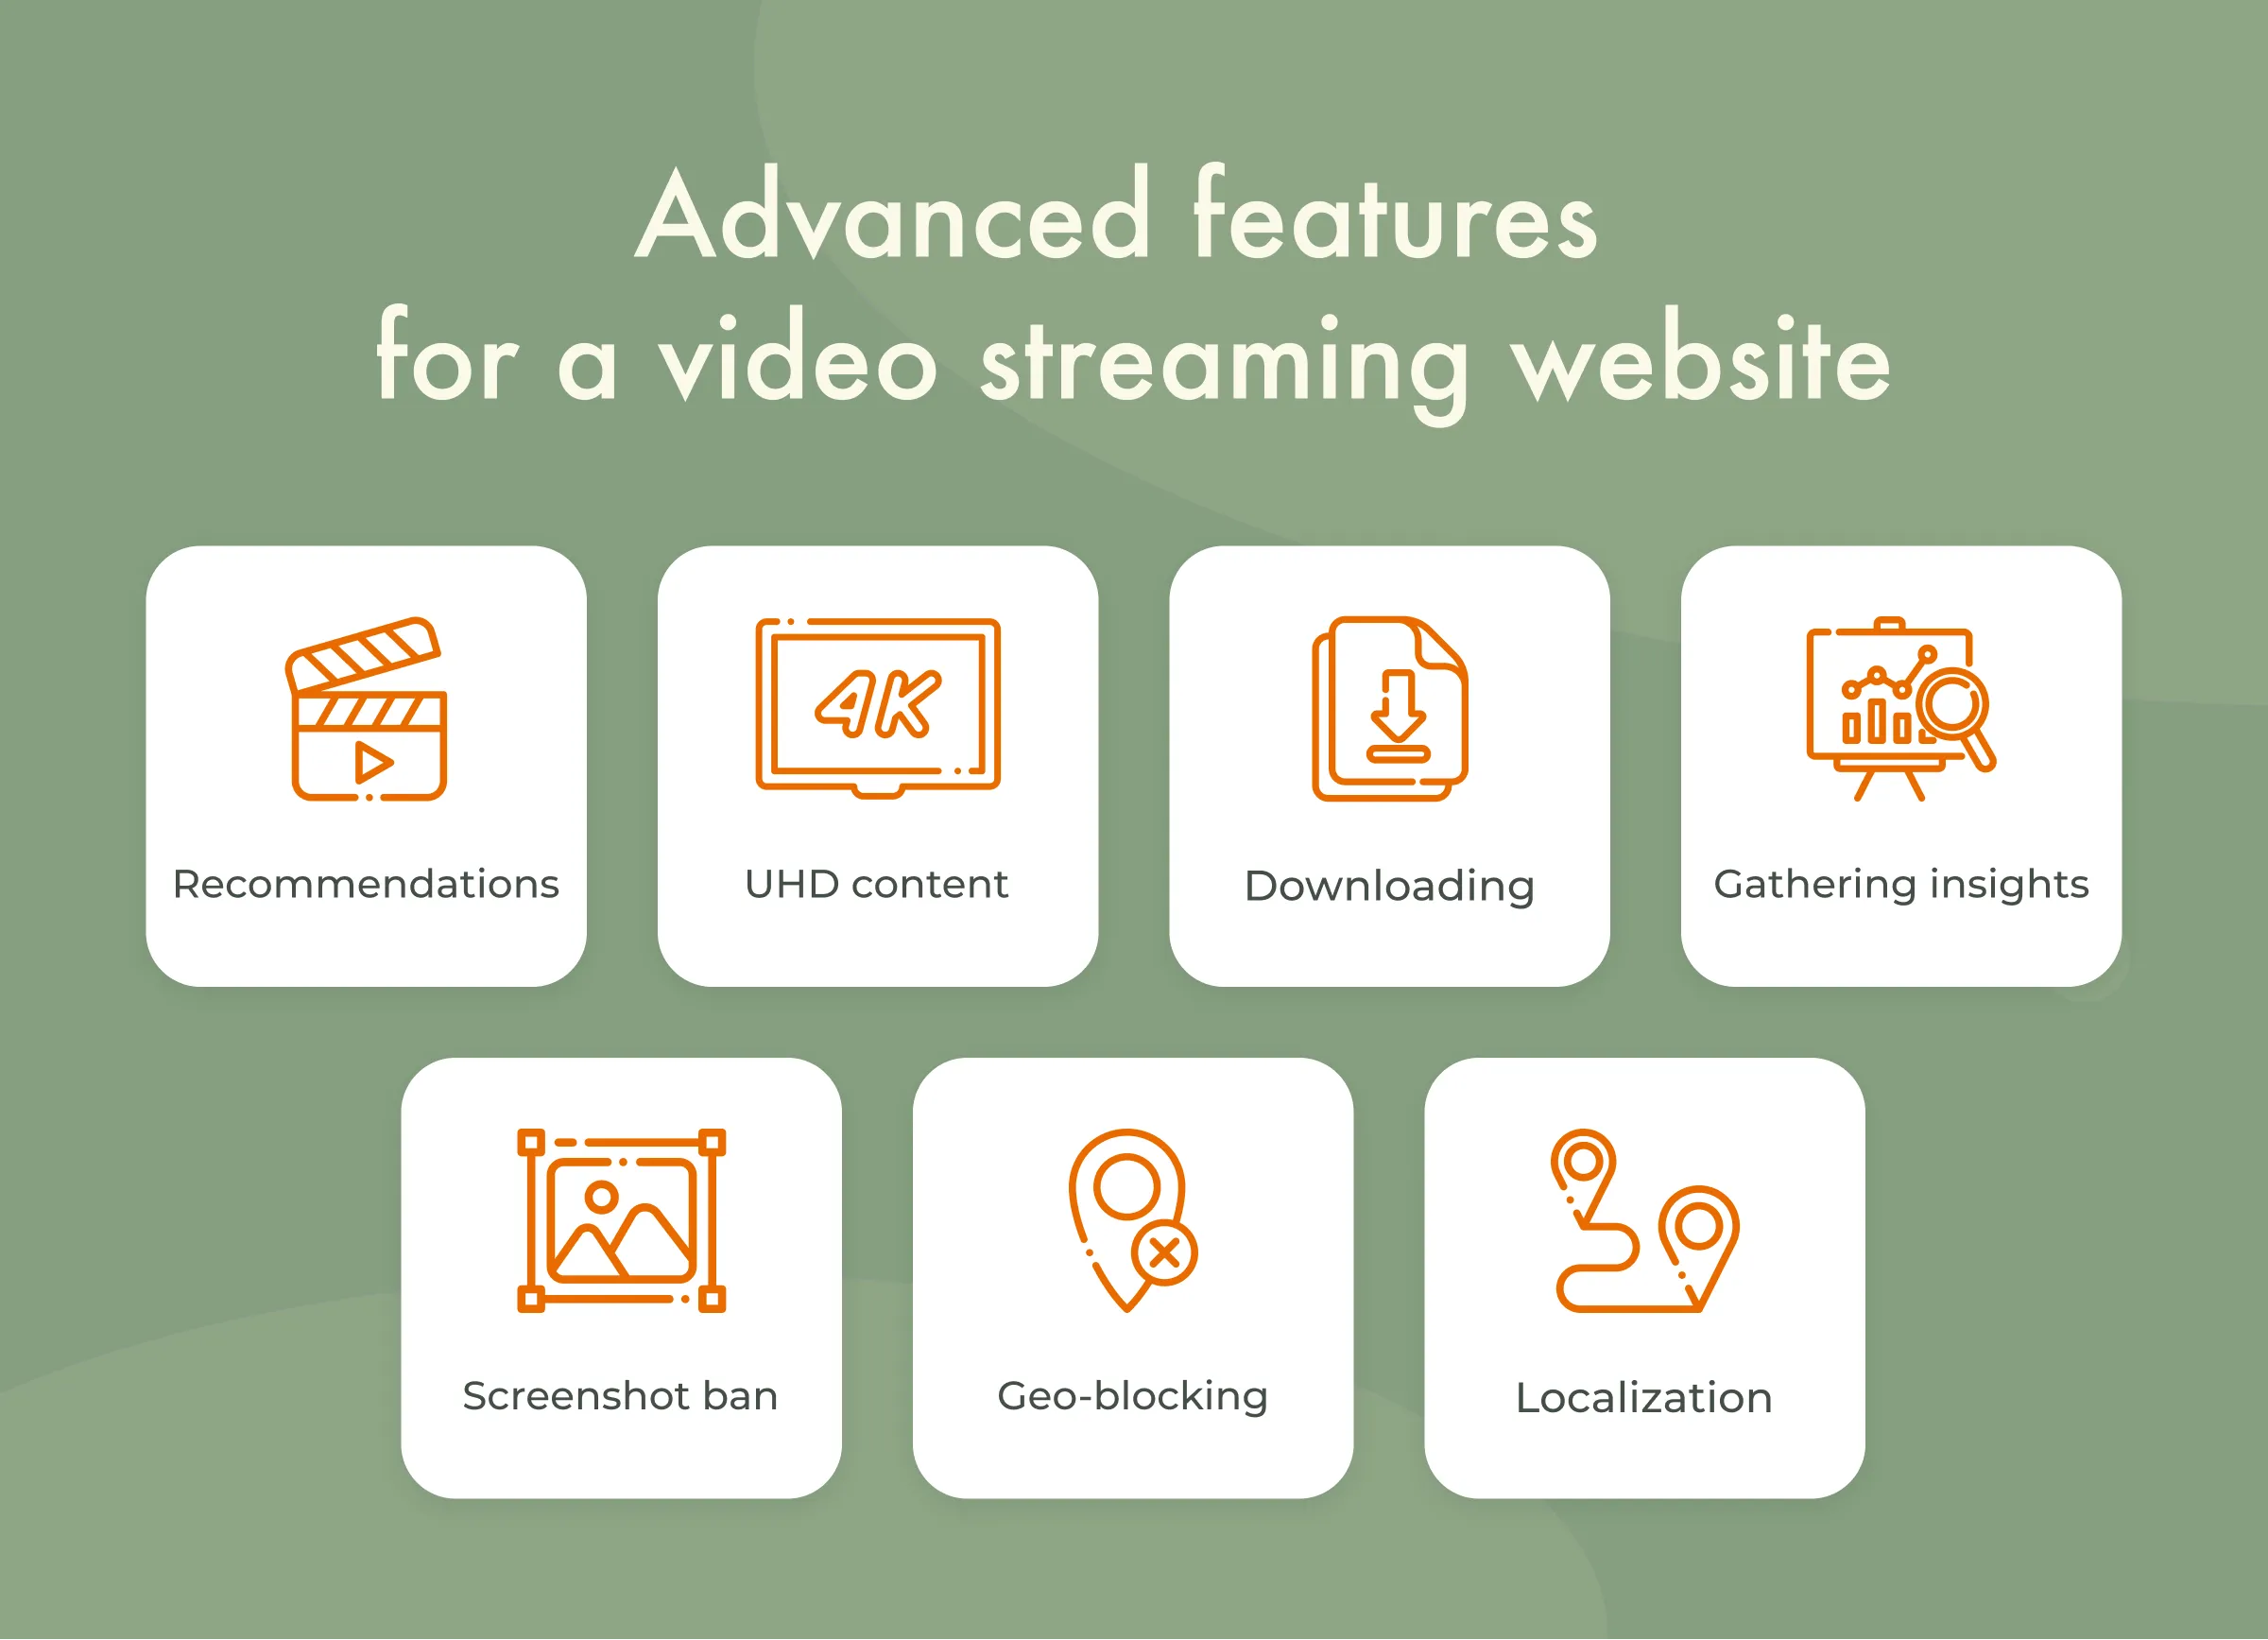 How to create a video streaming website with advanced features